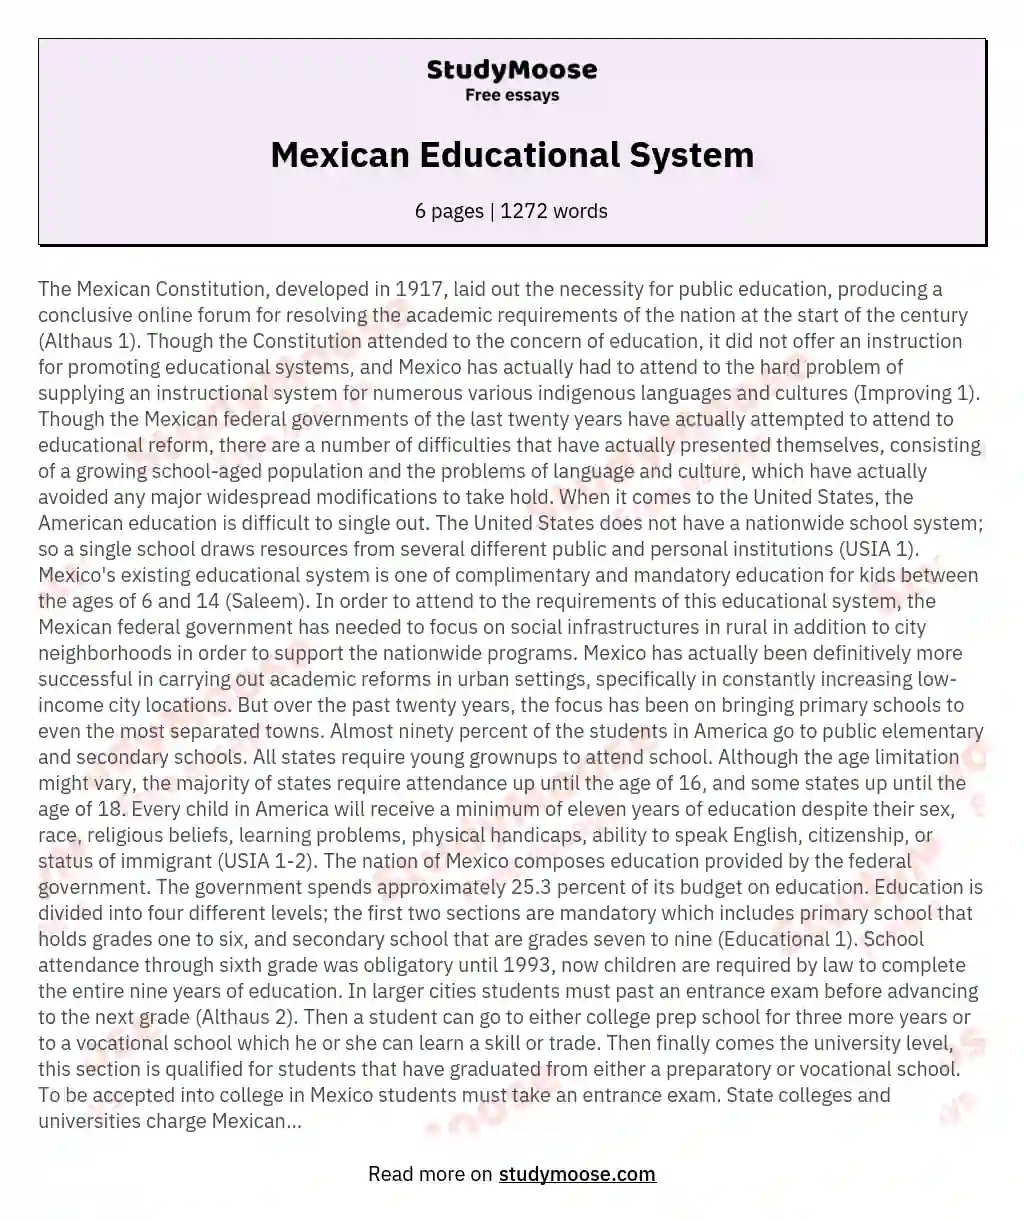 Mexican Educational System essay